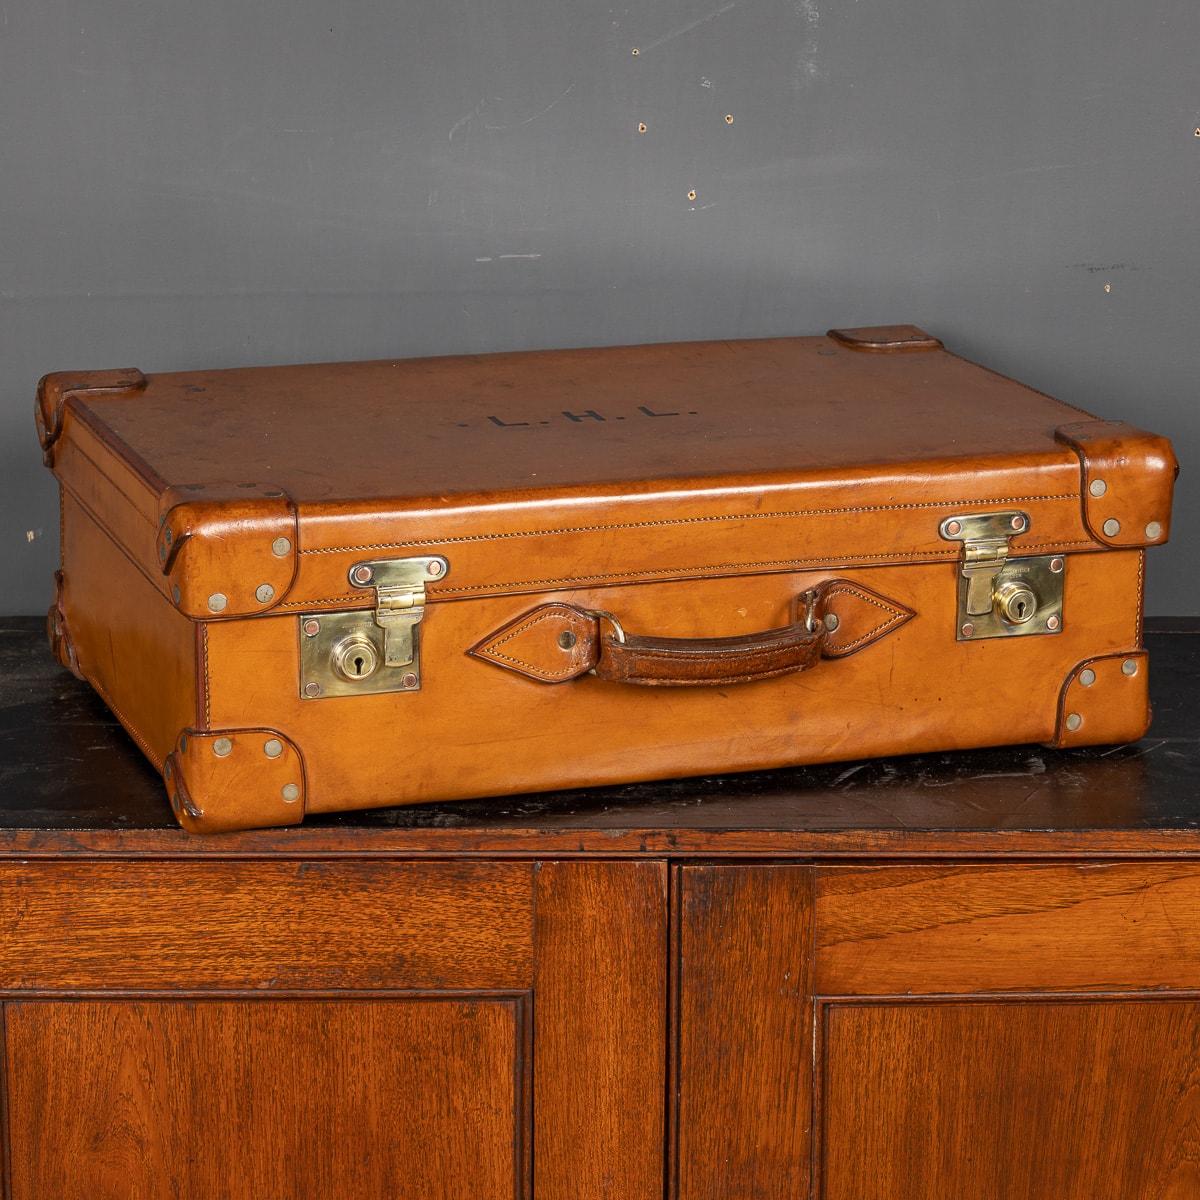 Antique early 20th Century British made Bridle hide covered suitcase. The leather shows wear but is still supple, mounted with brass fittings, oozing charm and elegance. A truly great piece for any collector.

CONDITION
In Good Condition - wear as